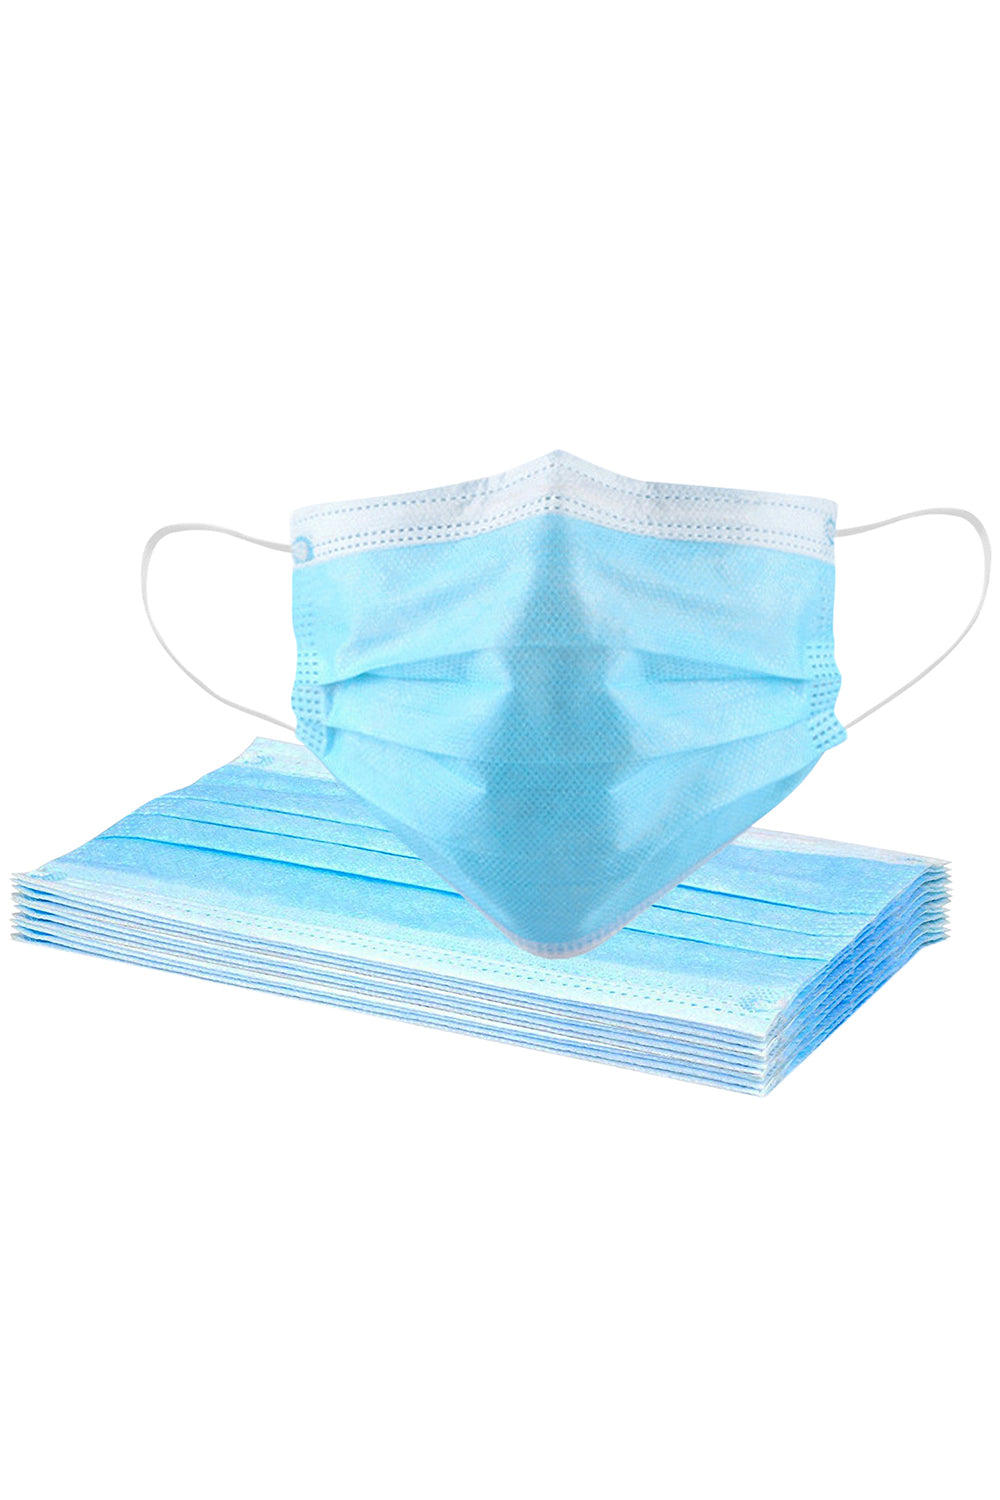 20 Pcs Disposable Face Masks with Elastic Ear Loop 3 Ply for Blocking Dust Air Pollution Protection